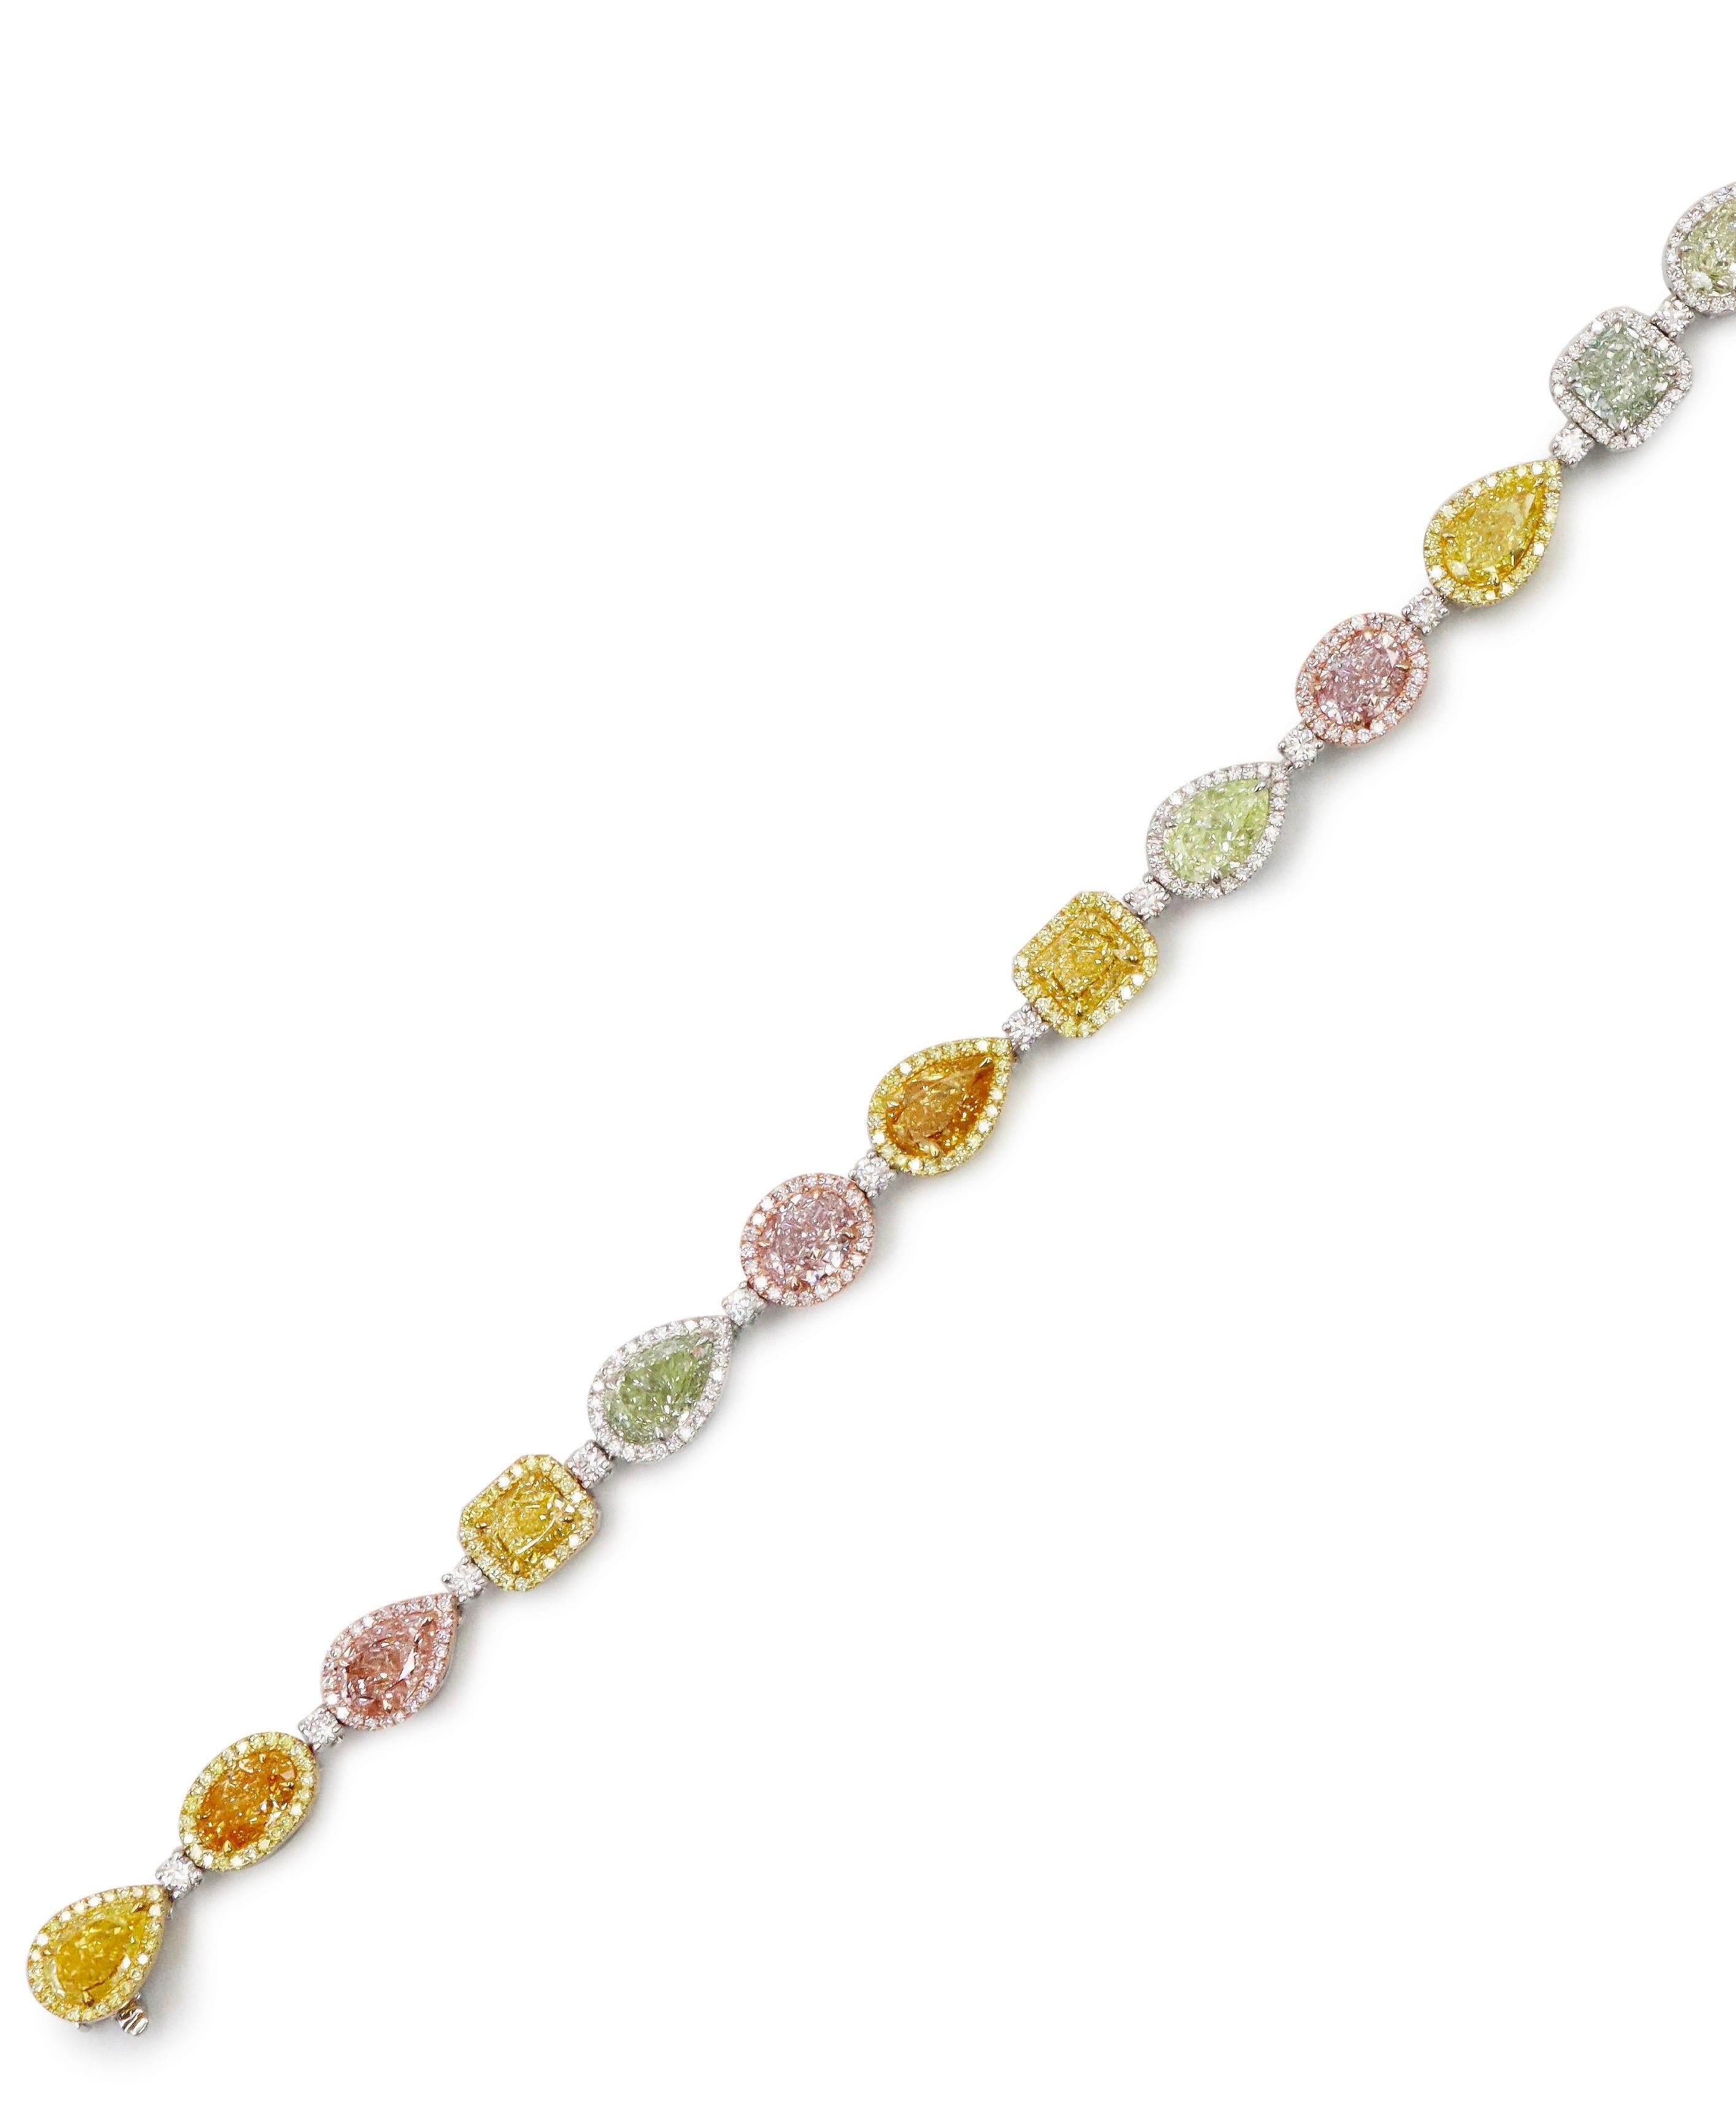 From Emilio Jewelry, a well known and respected wholesaler/dealer located on New York’s iconic Fifth Avenue,
Featuring some of the rarest Gia certified natural Fancy exotic color diamonds all set in one bracelet, ranging from pink,green, orange,